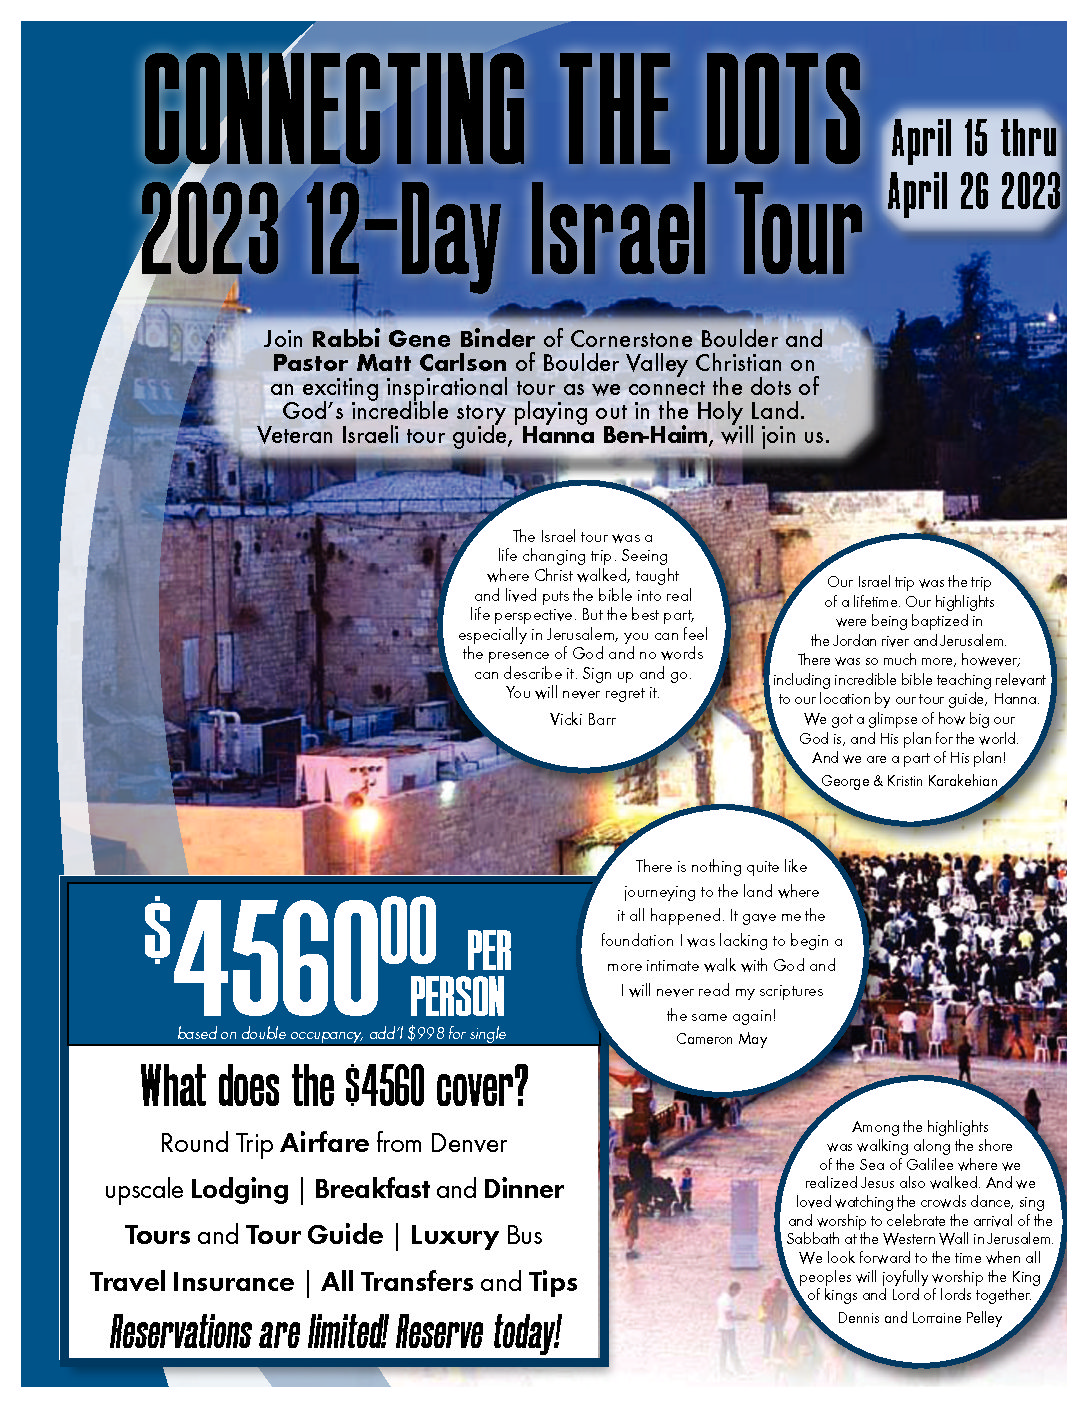 israel tours 2023 from australia